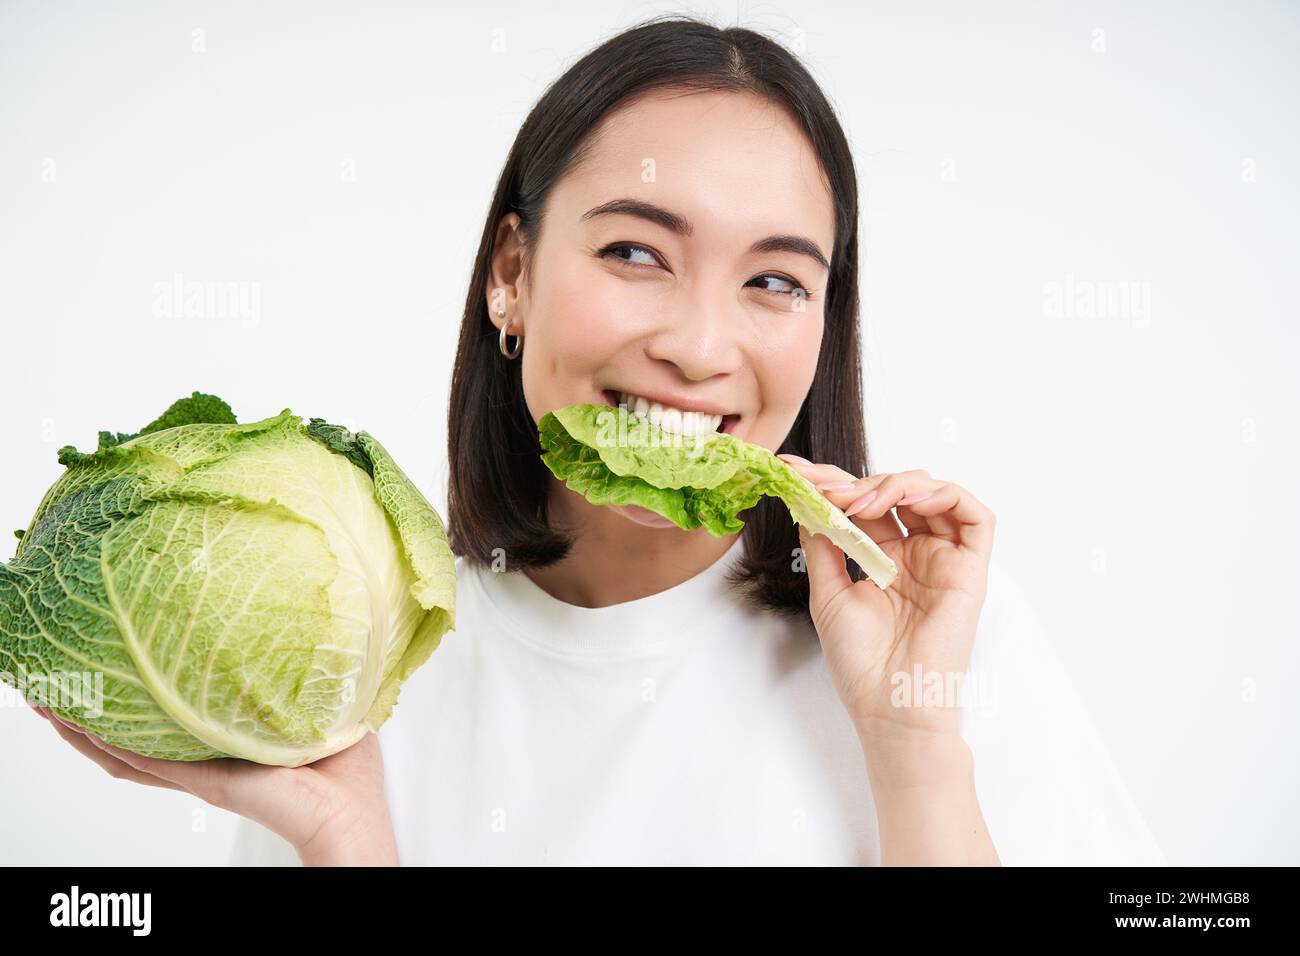 Close up of cute korean woman, eating cabbage, on diet, holding lettuce, isolated on white background Stock Photo